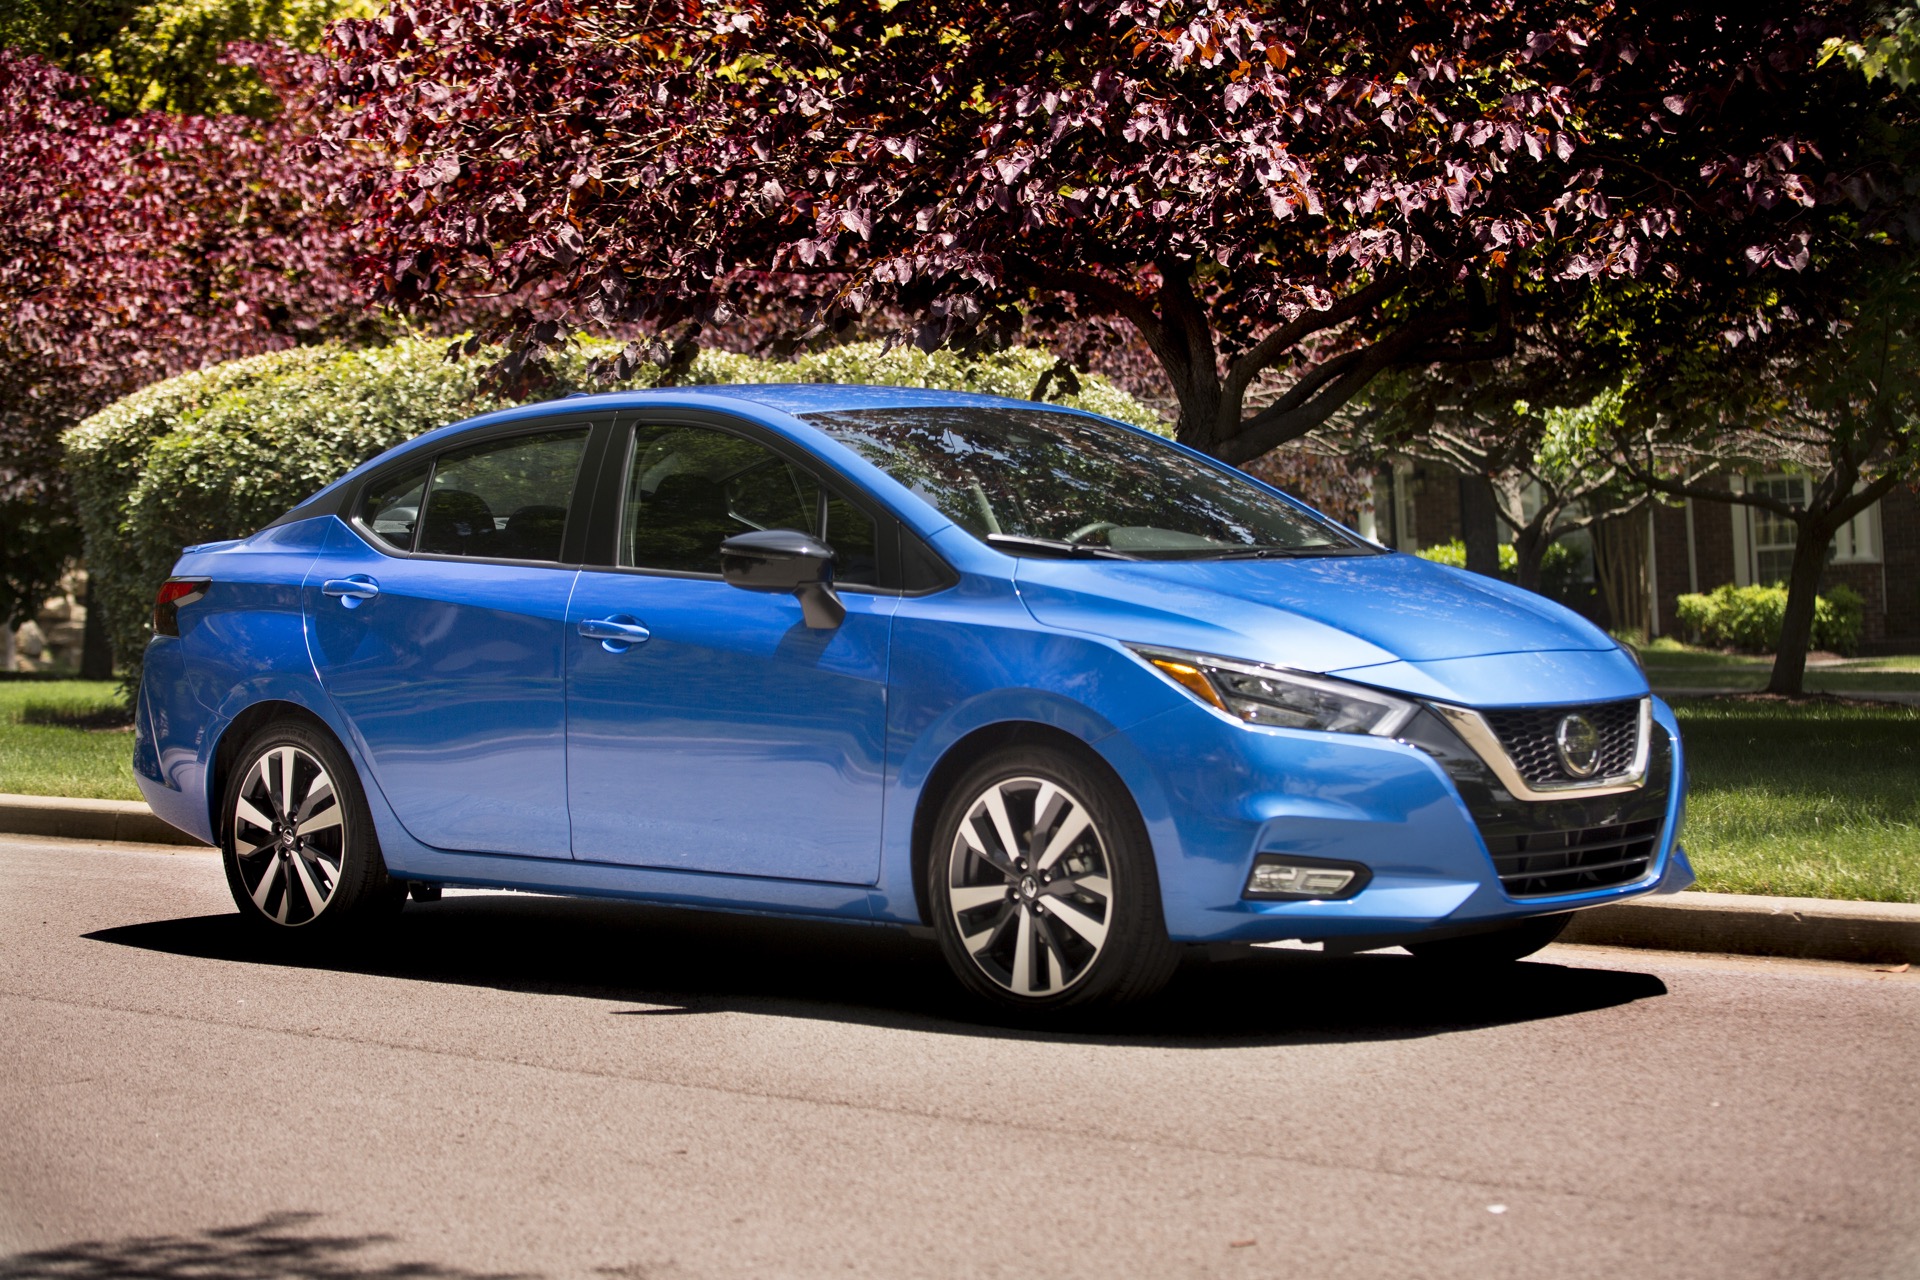 2021 Nissan Versa remains one of the cheapest cars to buy at $15,855